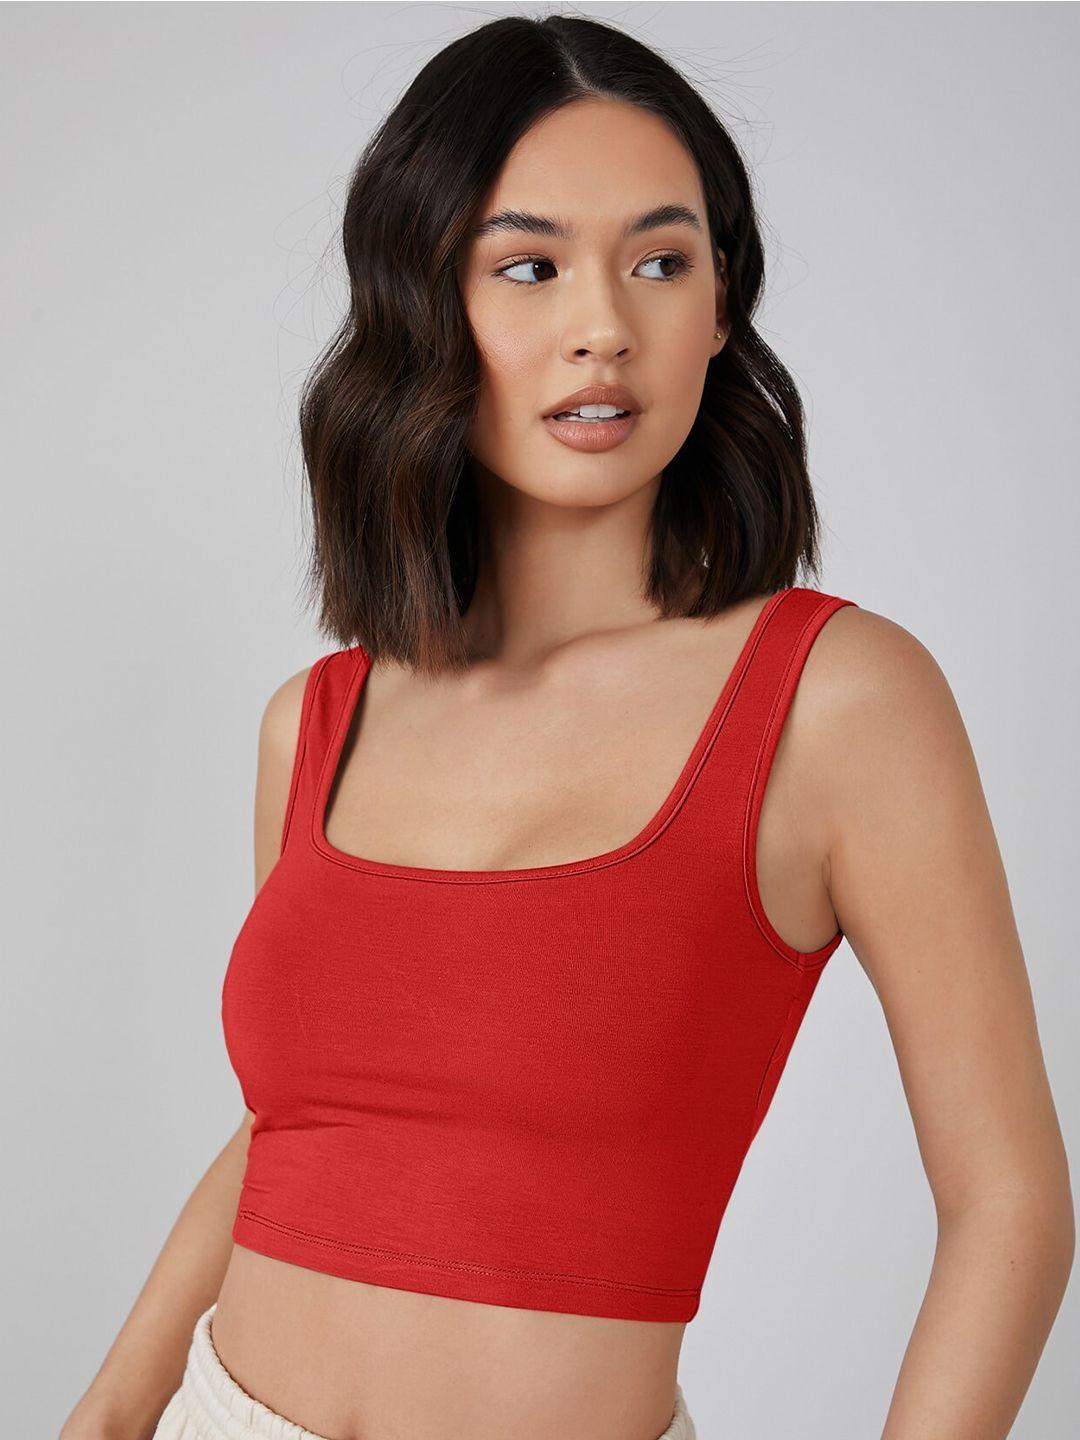 AAHWAN Women Red Solid Fitted Crop Top